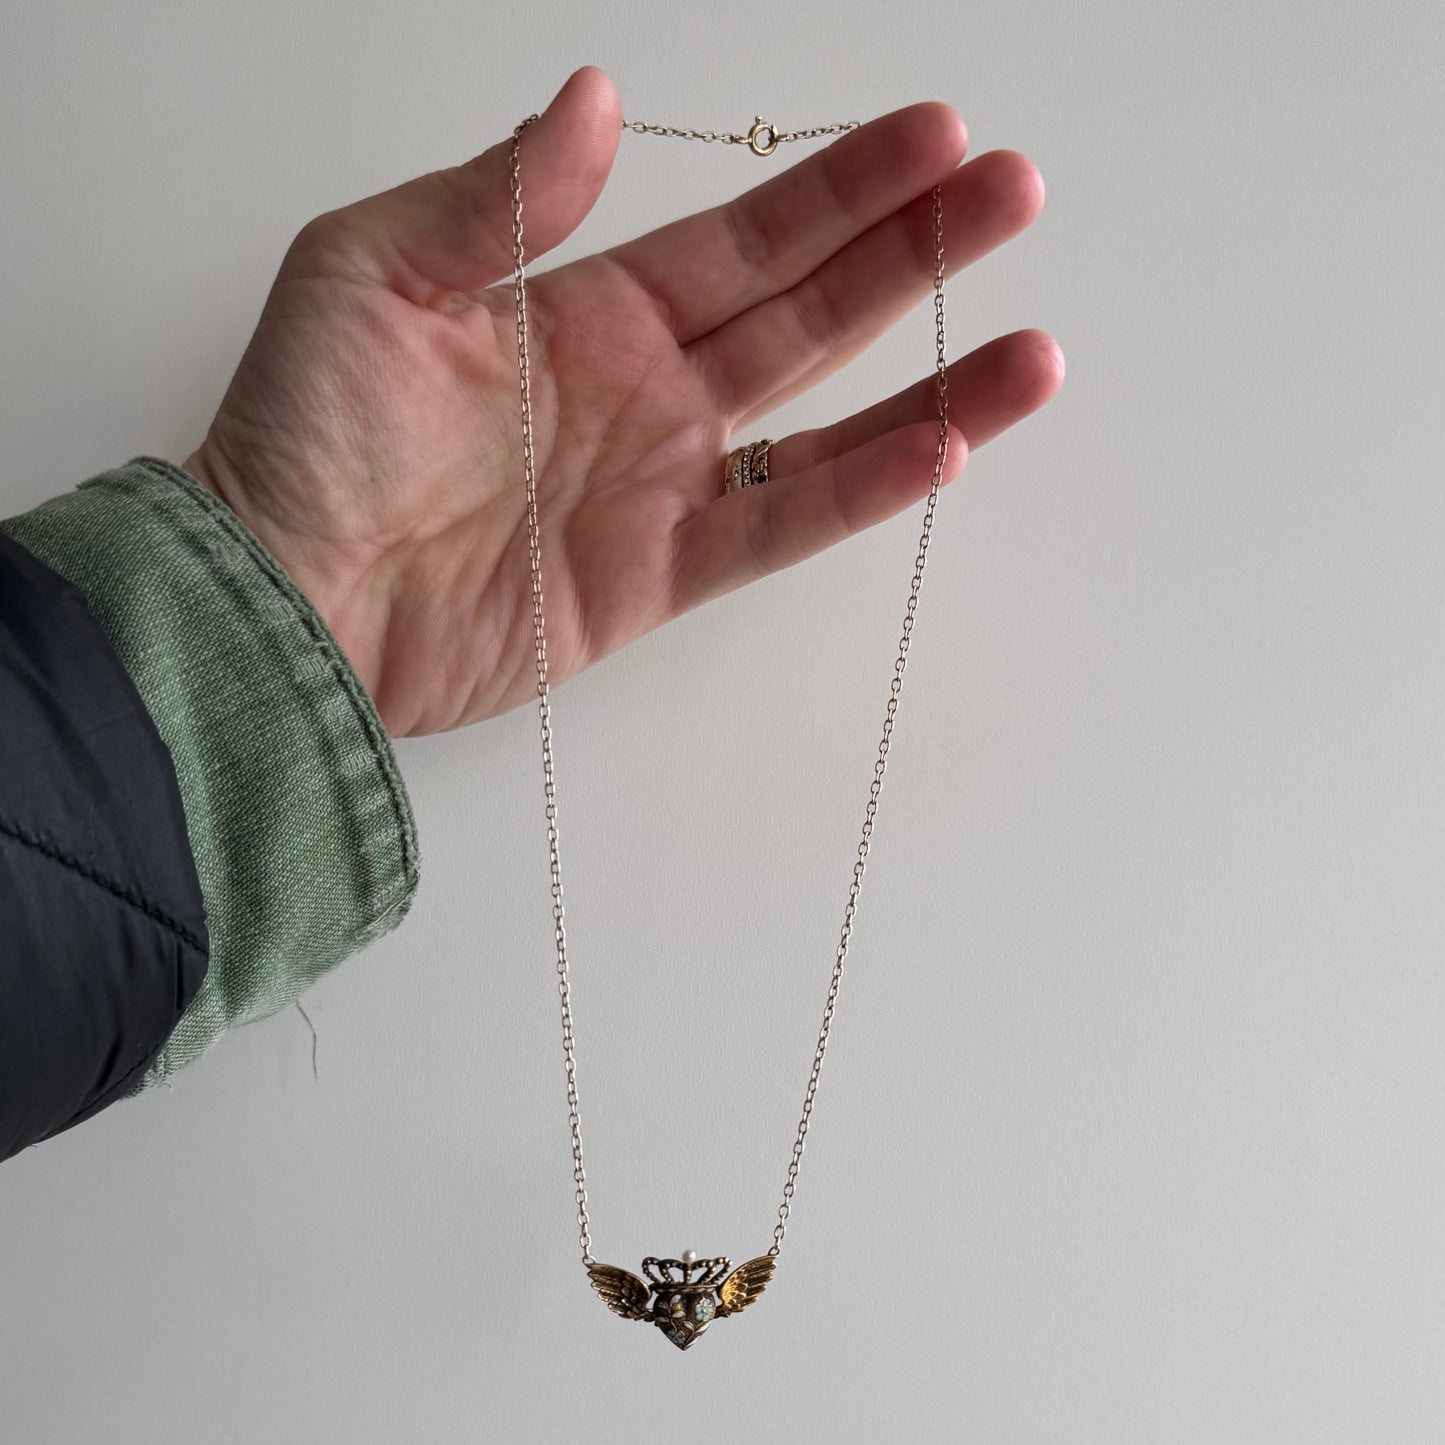 A N T I Q U E // love in flight / 10k and enamel winged and crowned heart / a conversion necklace